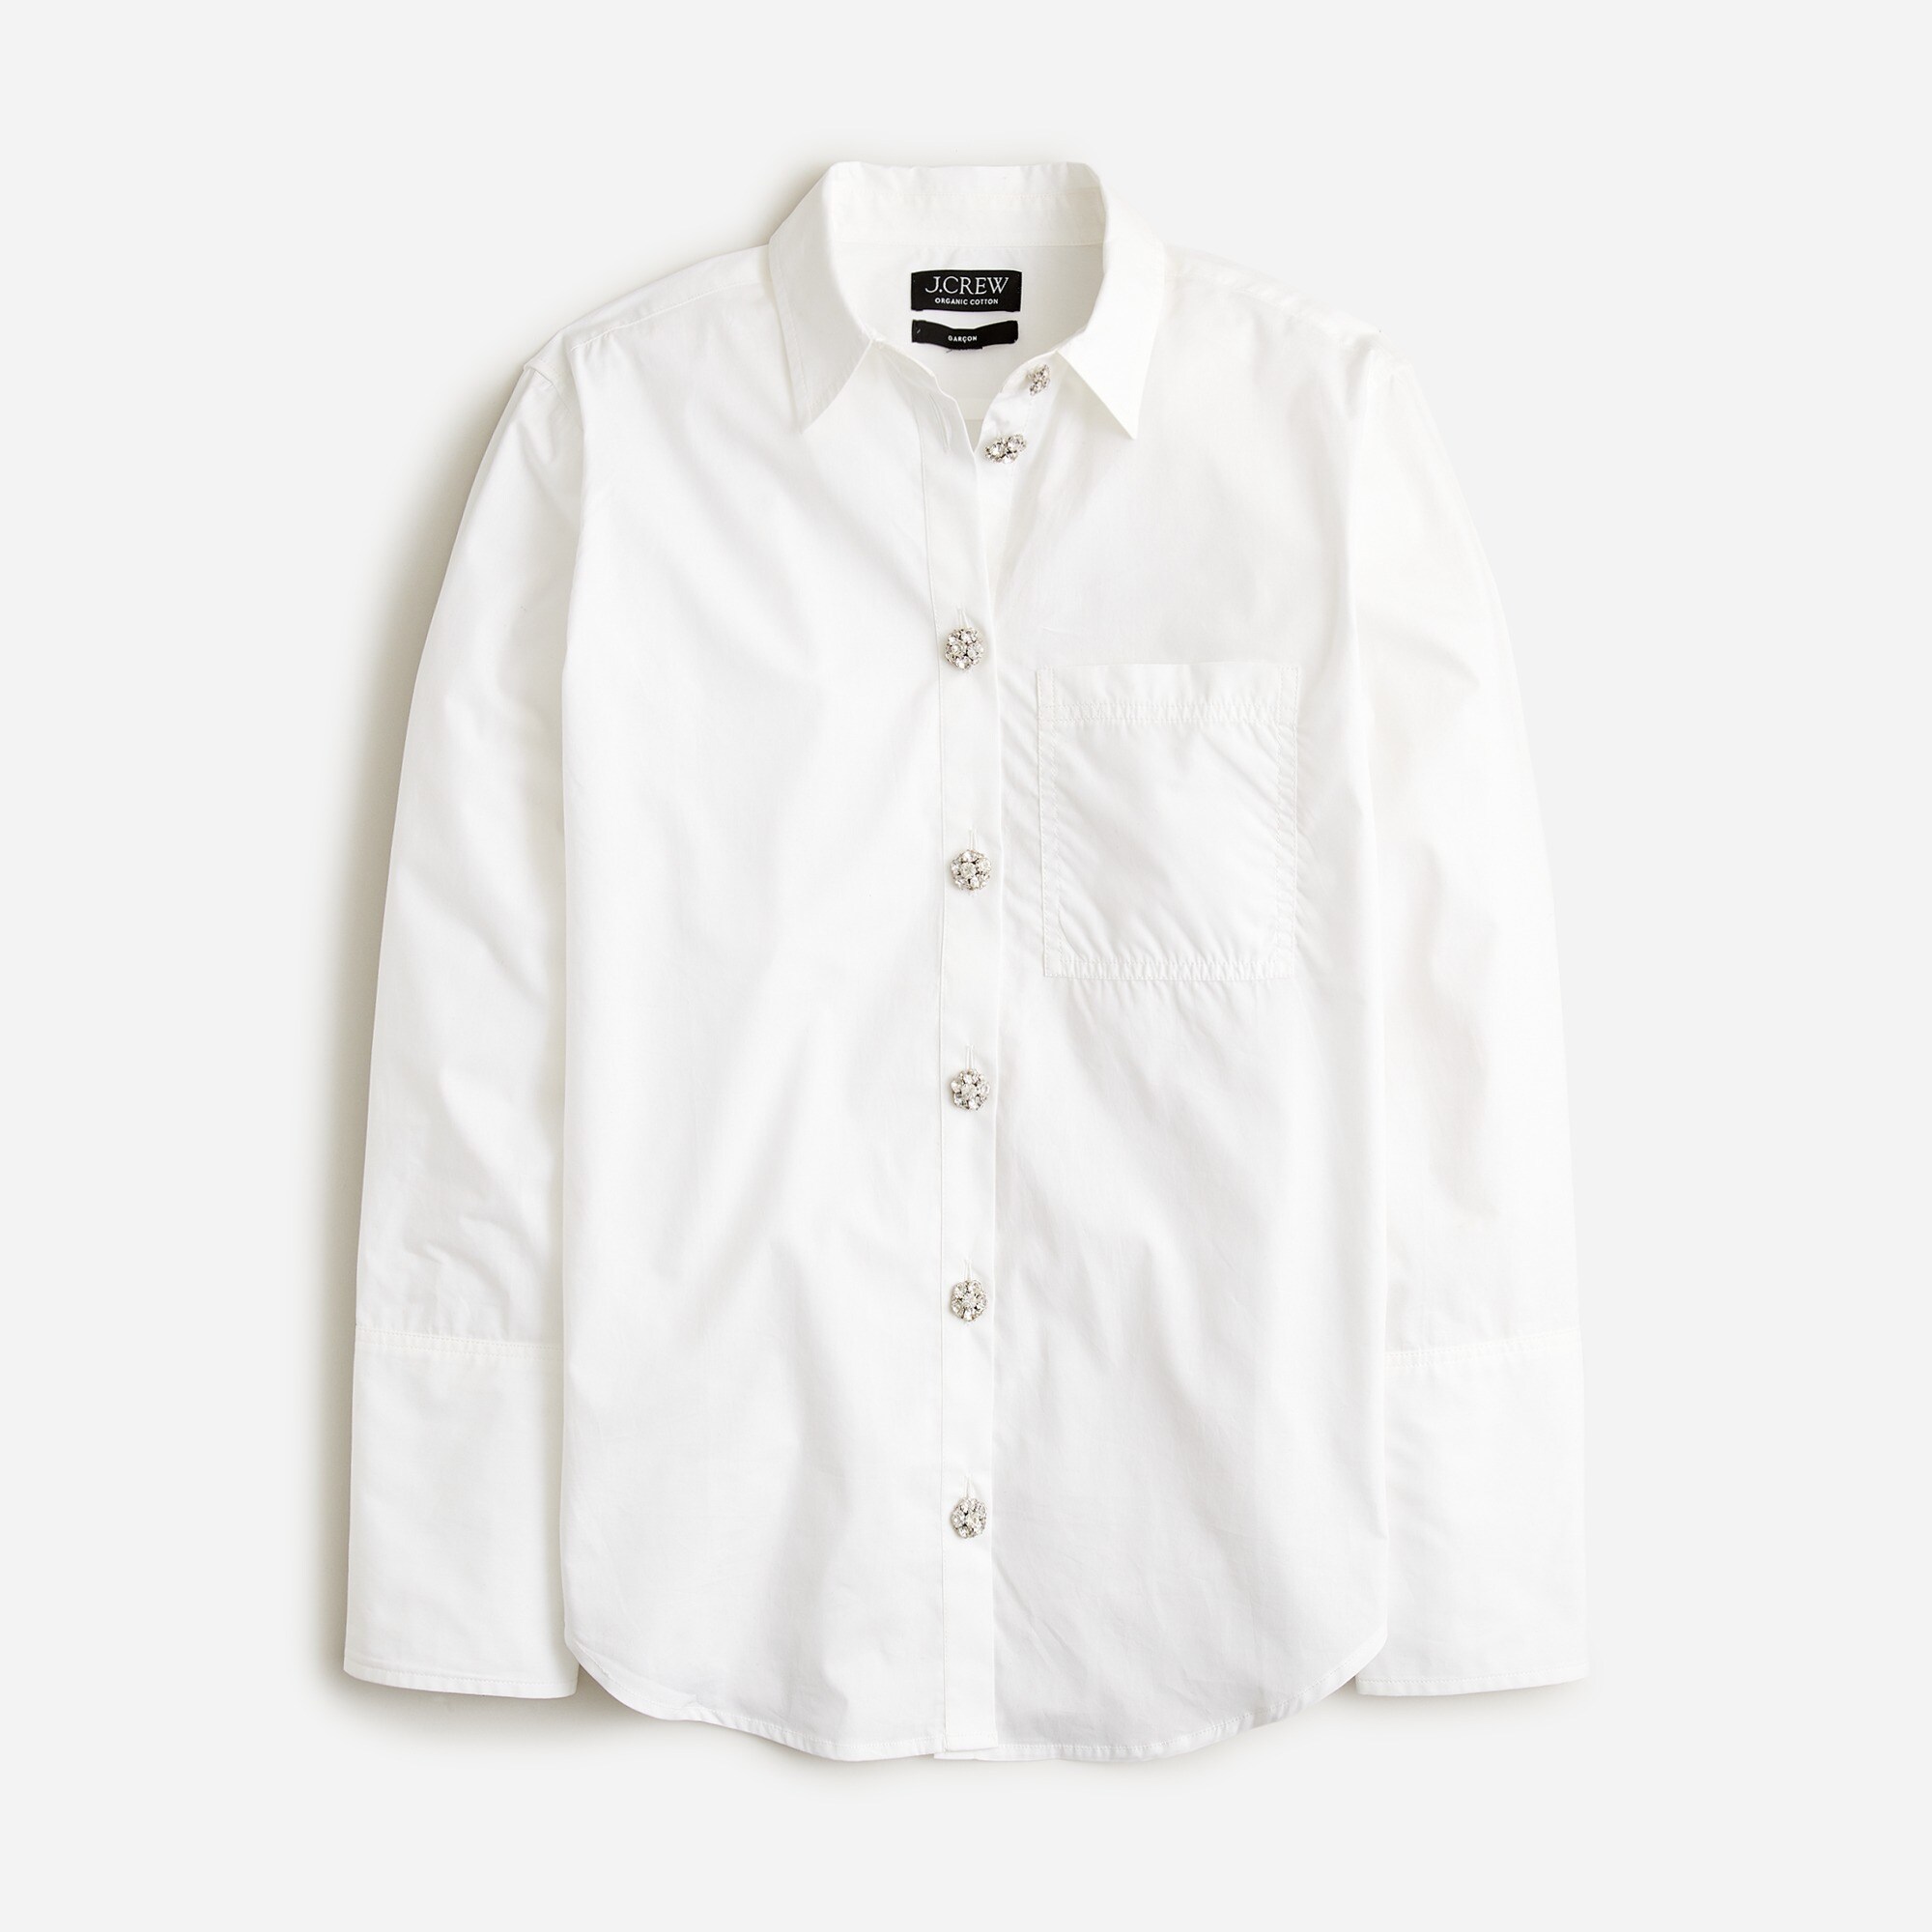  Gar&ccedil;on classic shirt with jewel buttons in cotton poplin